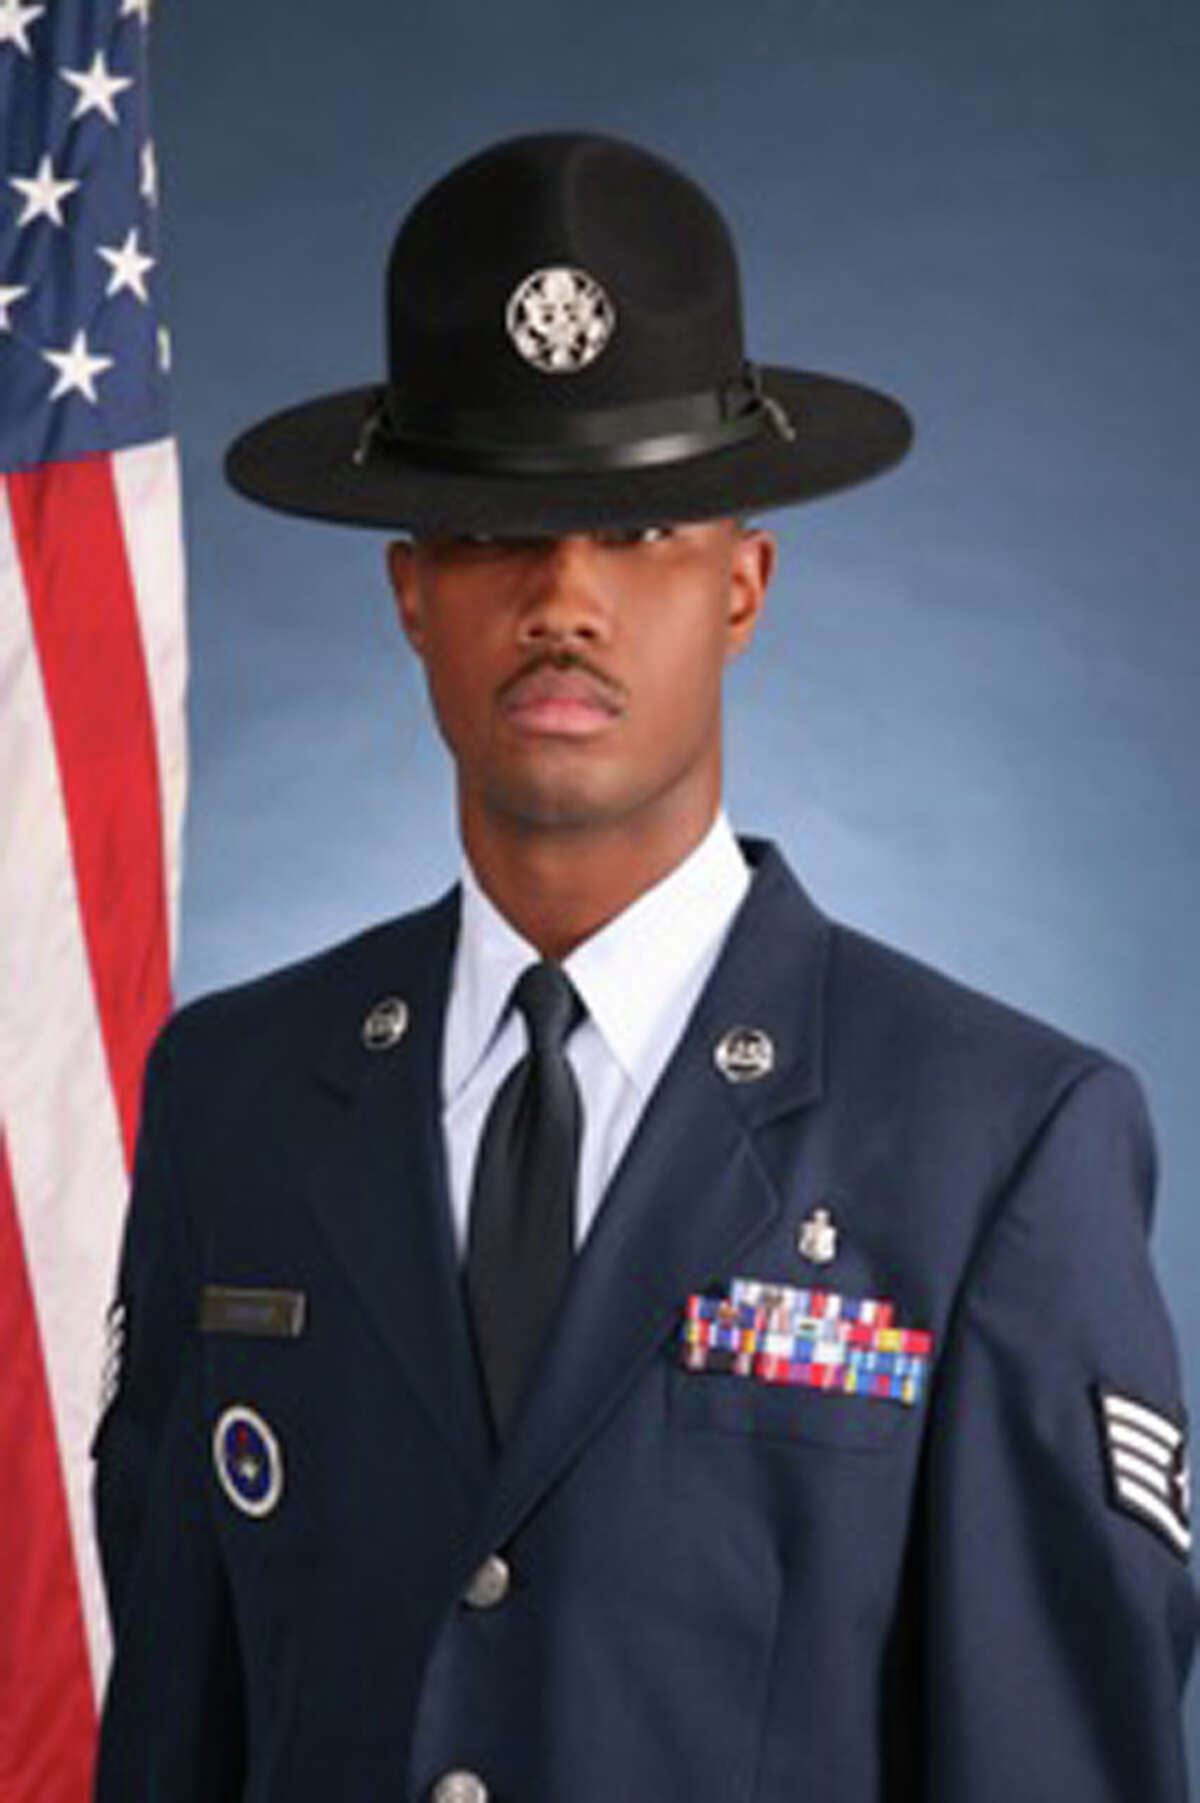 Staff Sgt. Christopher T. Jackson is one of 25 basic training instructors under investigation at Lackland.